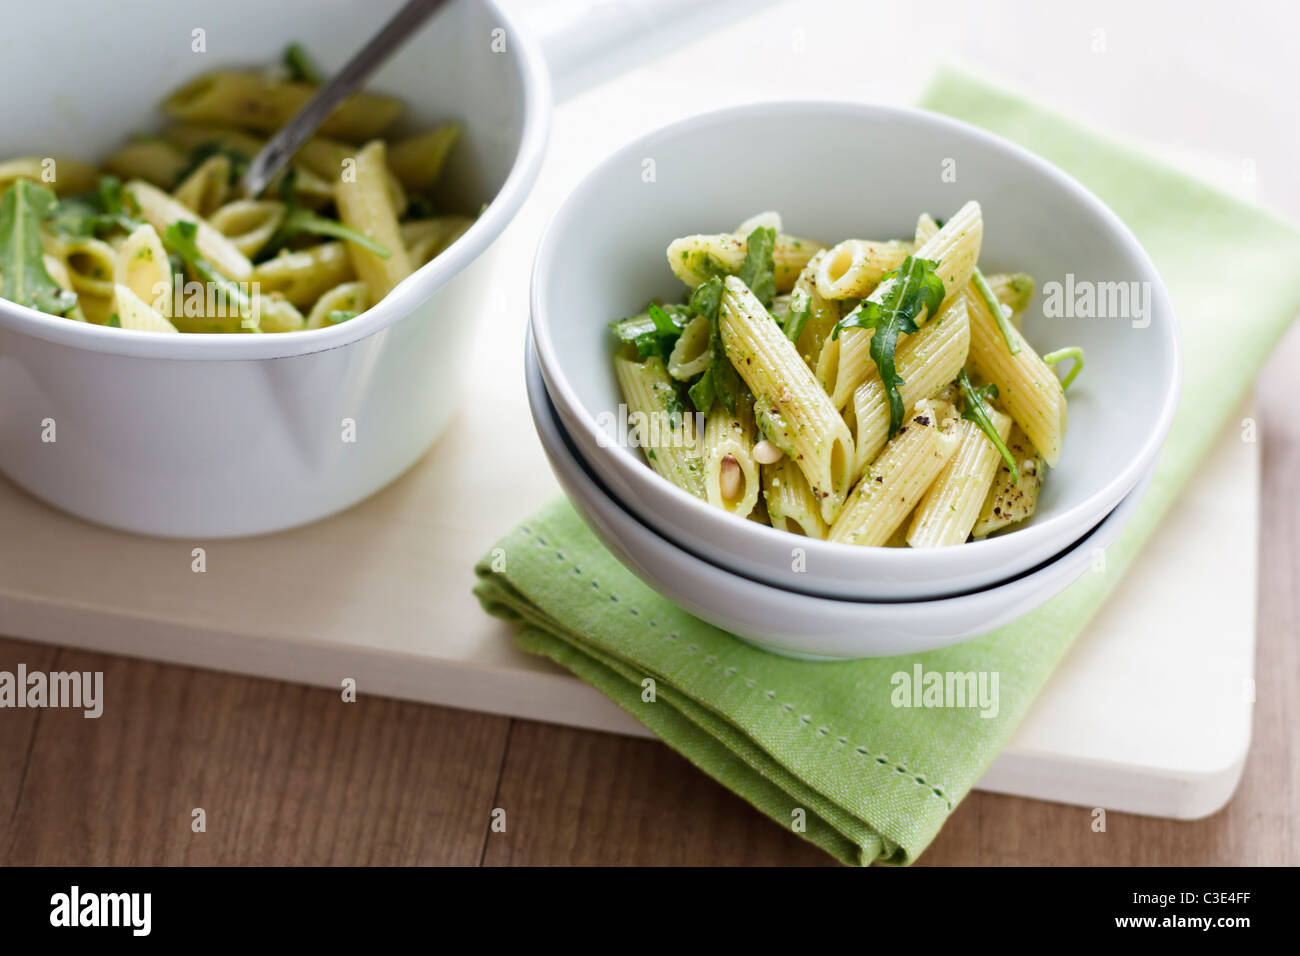 Rigatoni with home made rocket pesto, served in a white bowl. Stock Photo